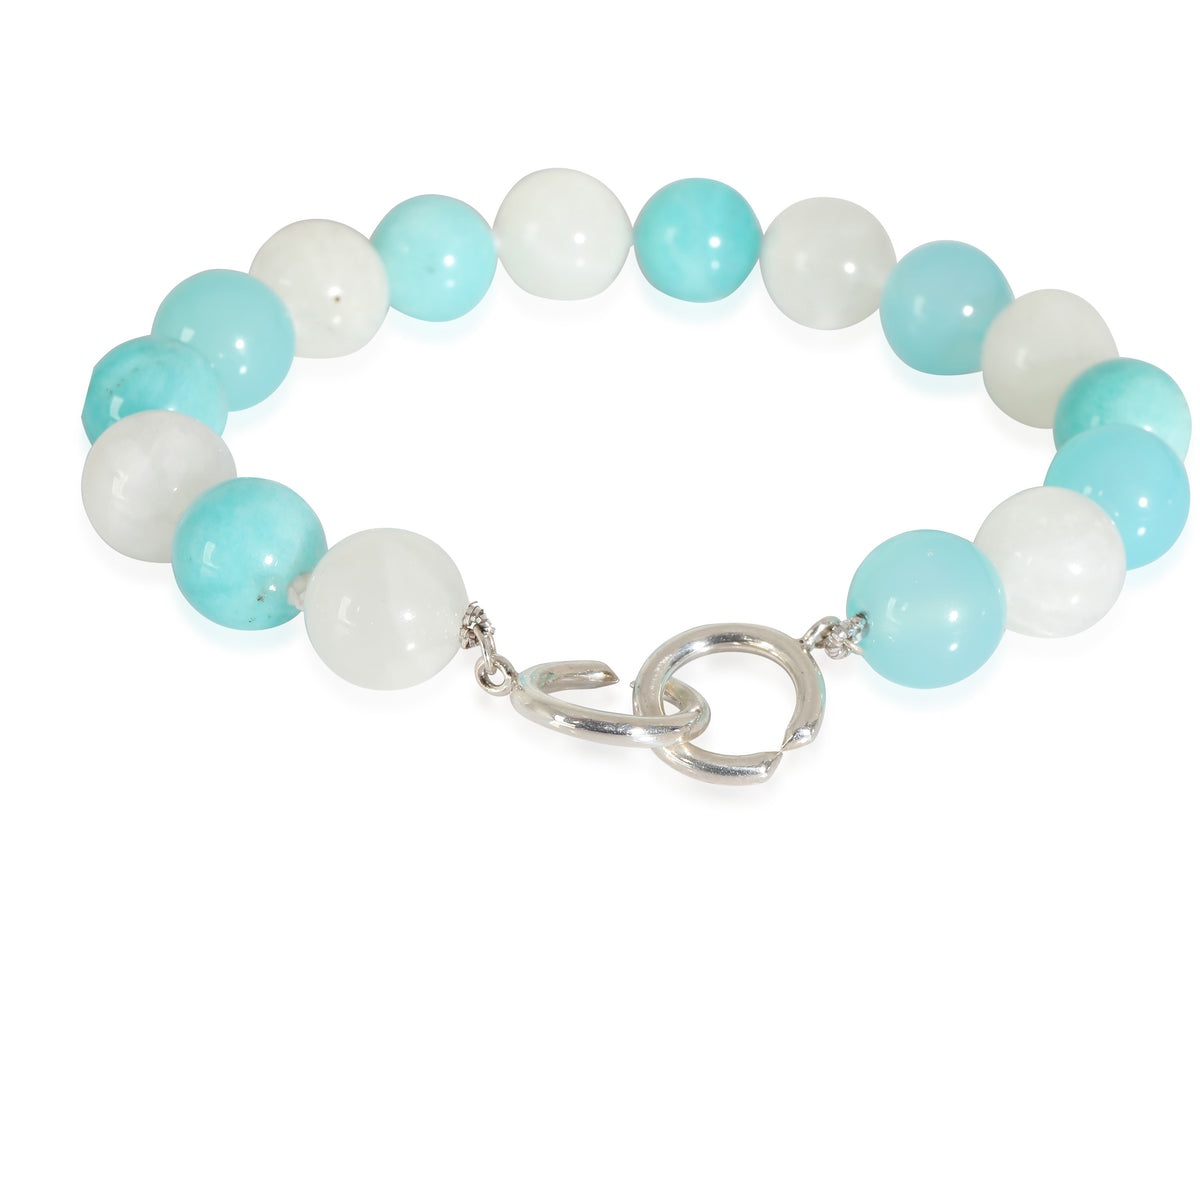 Tiffany & Co. Paloma Picasso Amazonite & Chalcedony Bracelet in  Sterling Silver